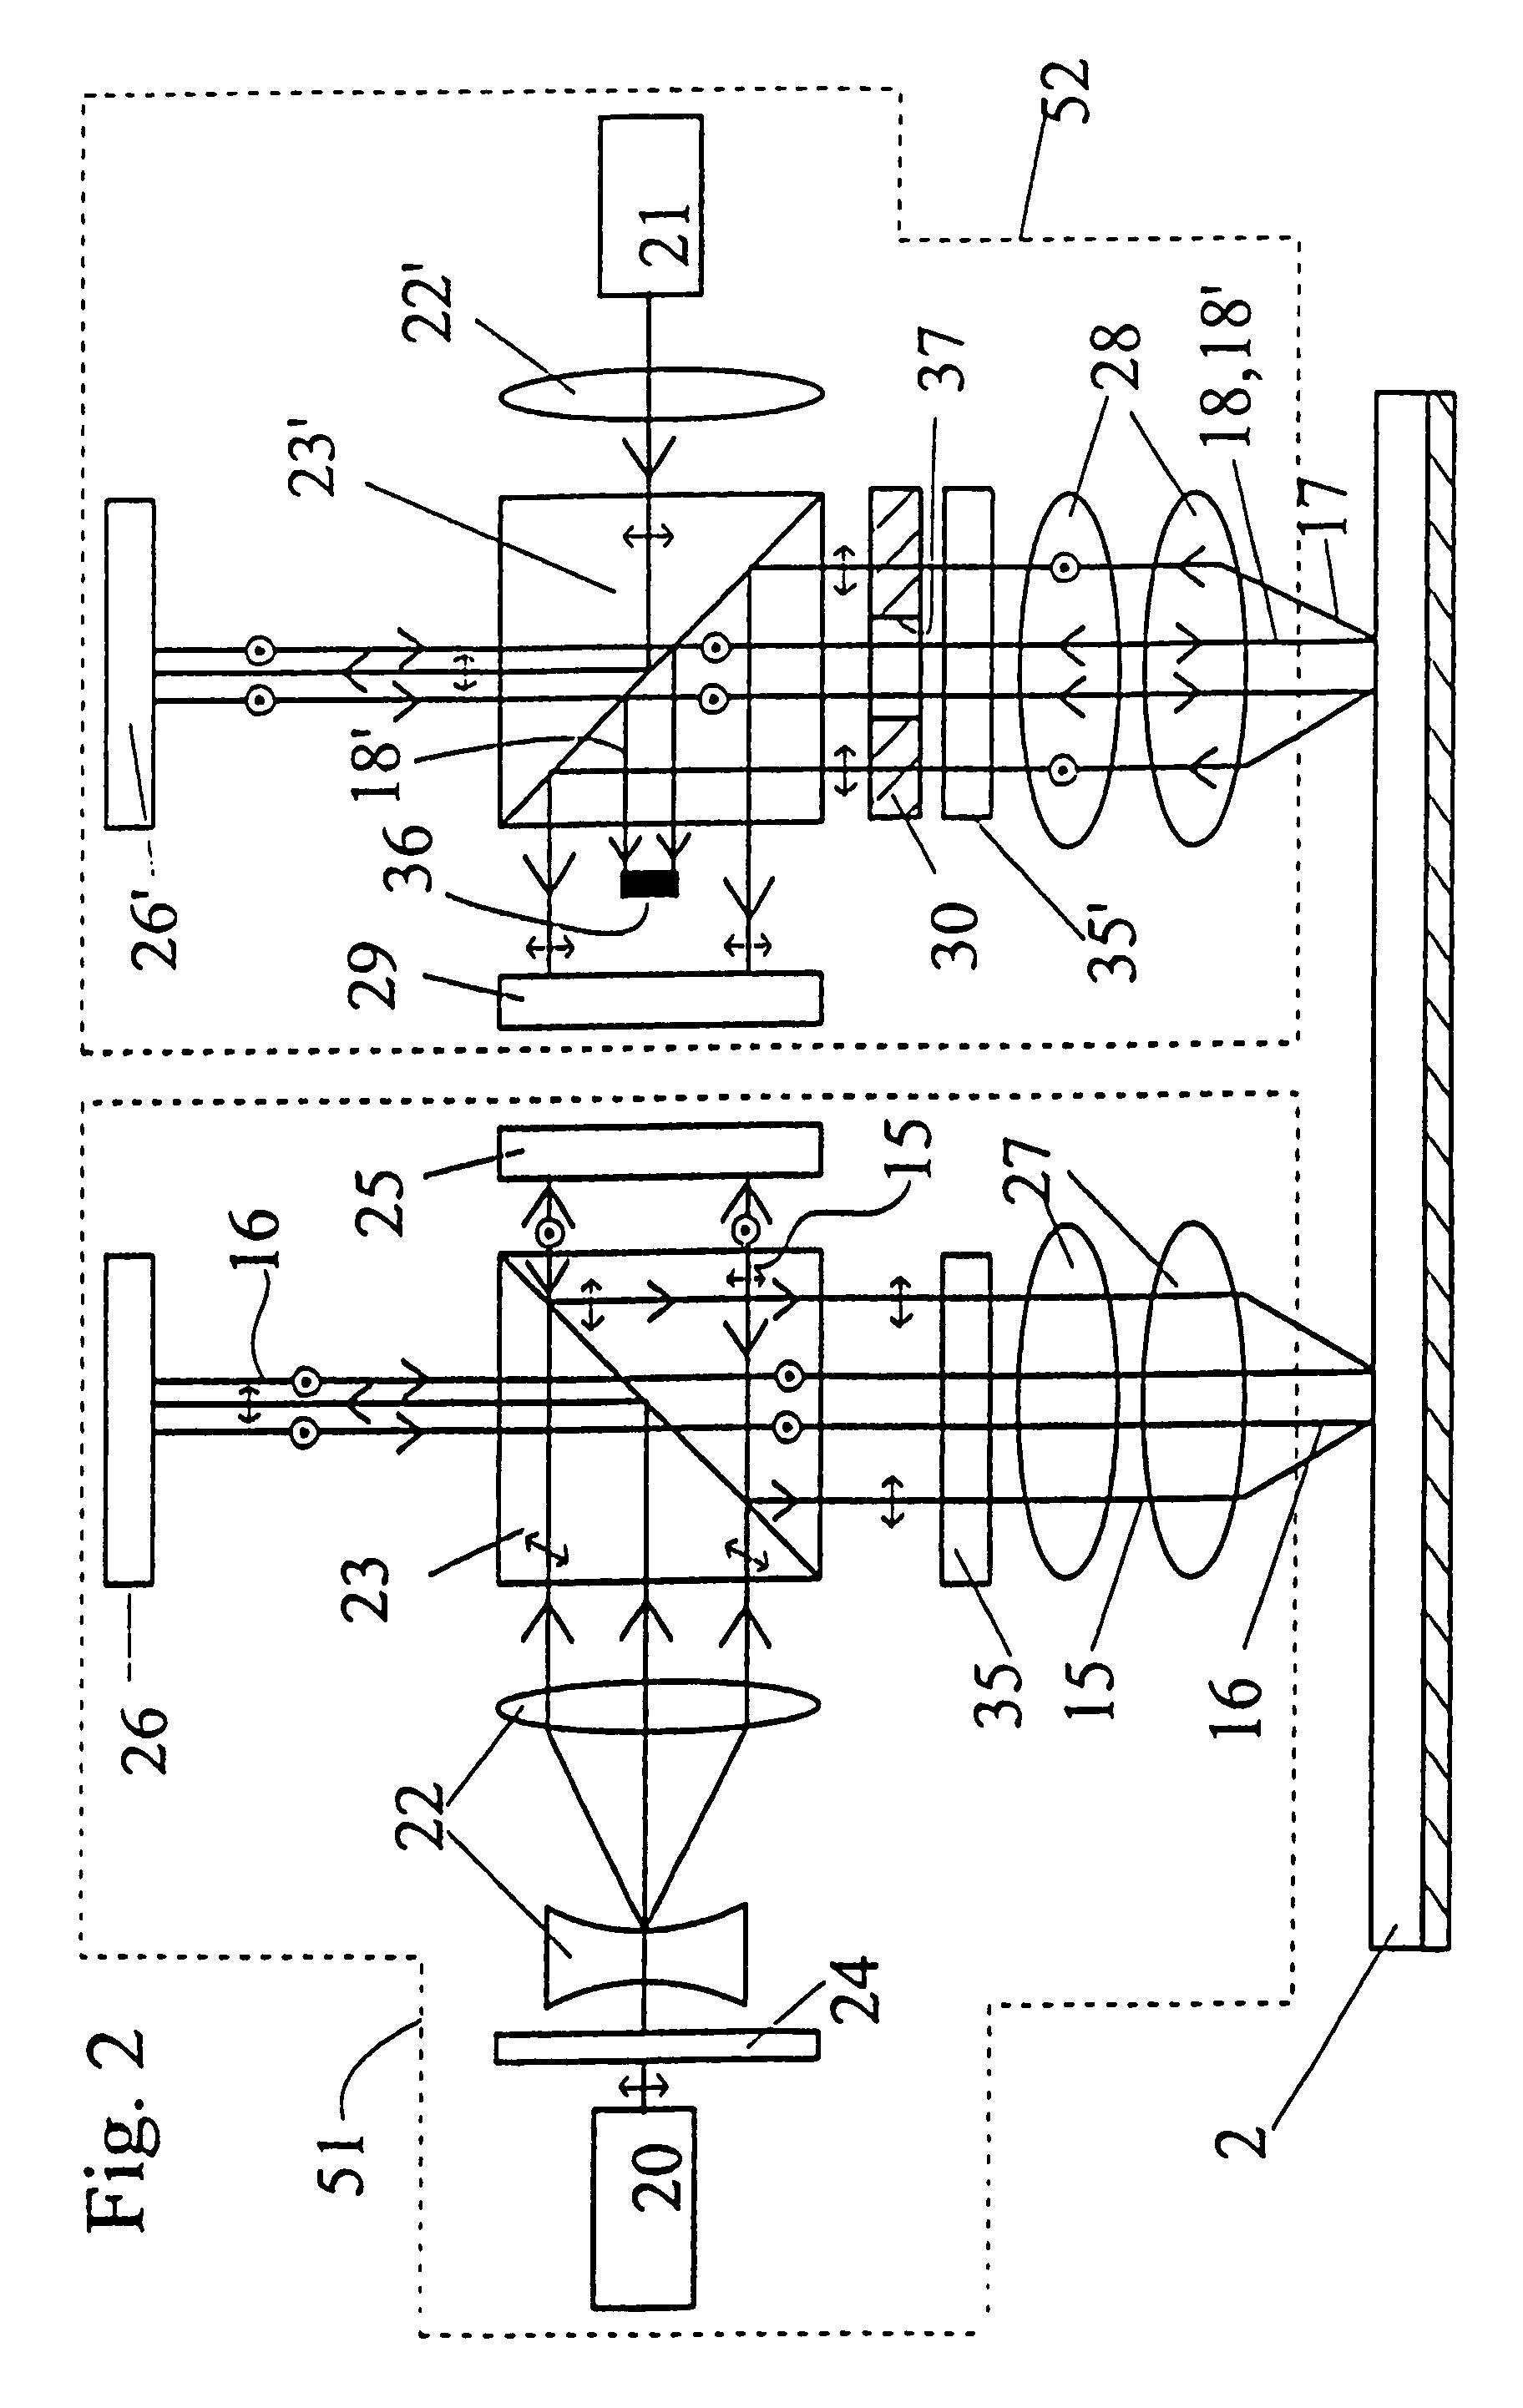 System and method for recording of information on a holographic recording medium, preferably an optical card